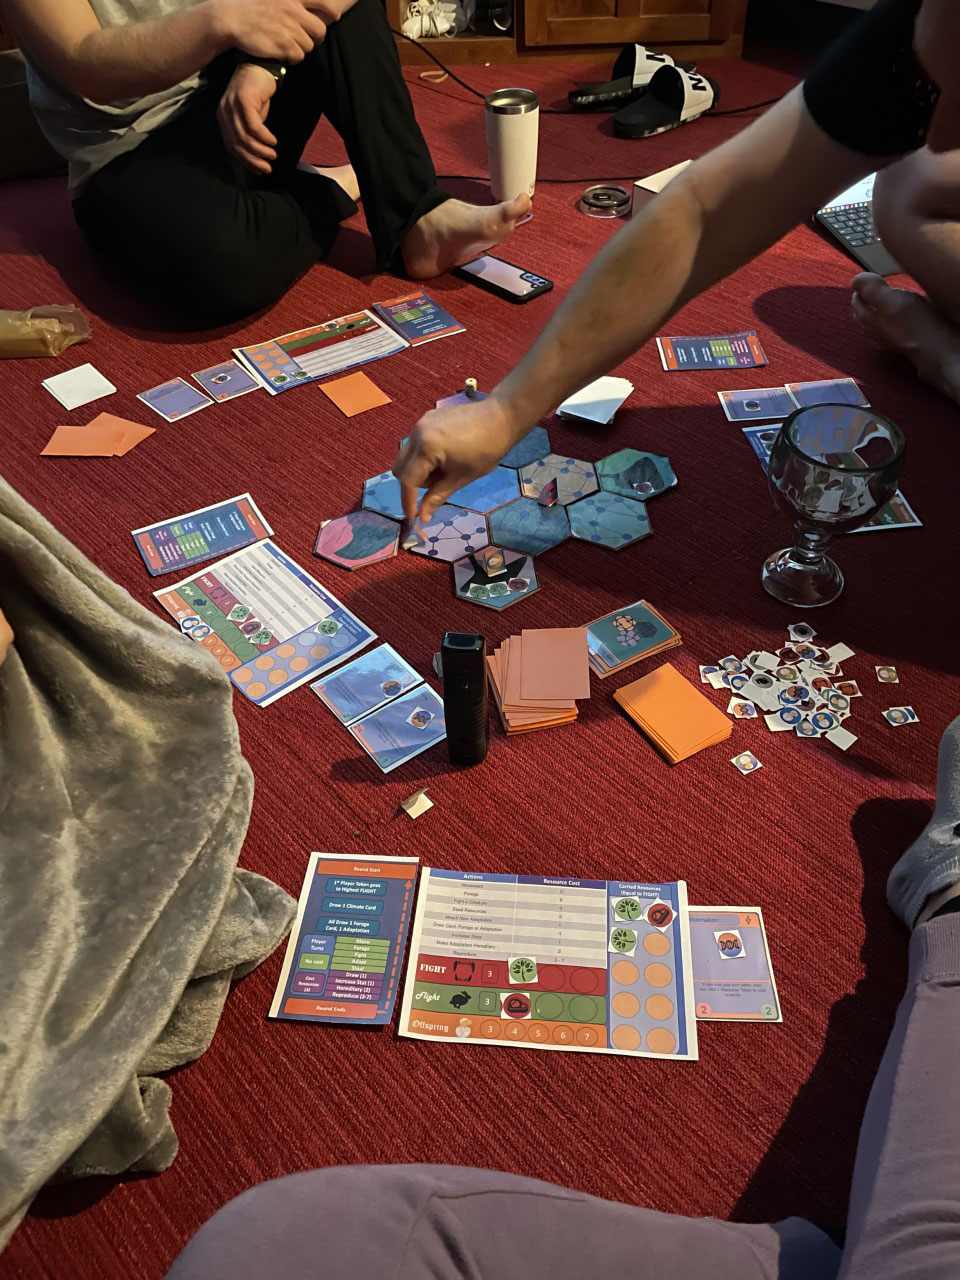 Players sitting on red carpeting around hexagonal game pieces, orange cards and multicolored player games boards .